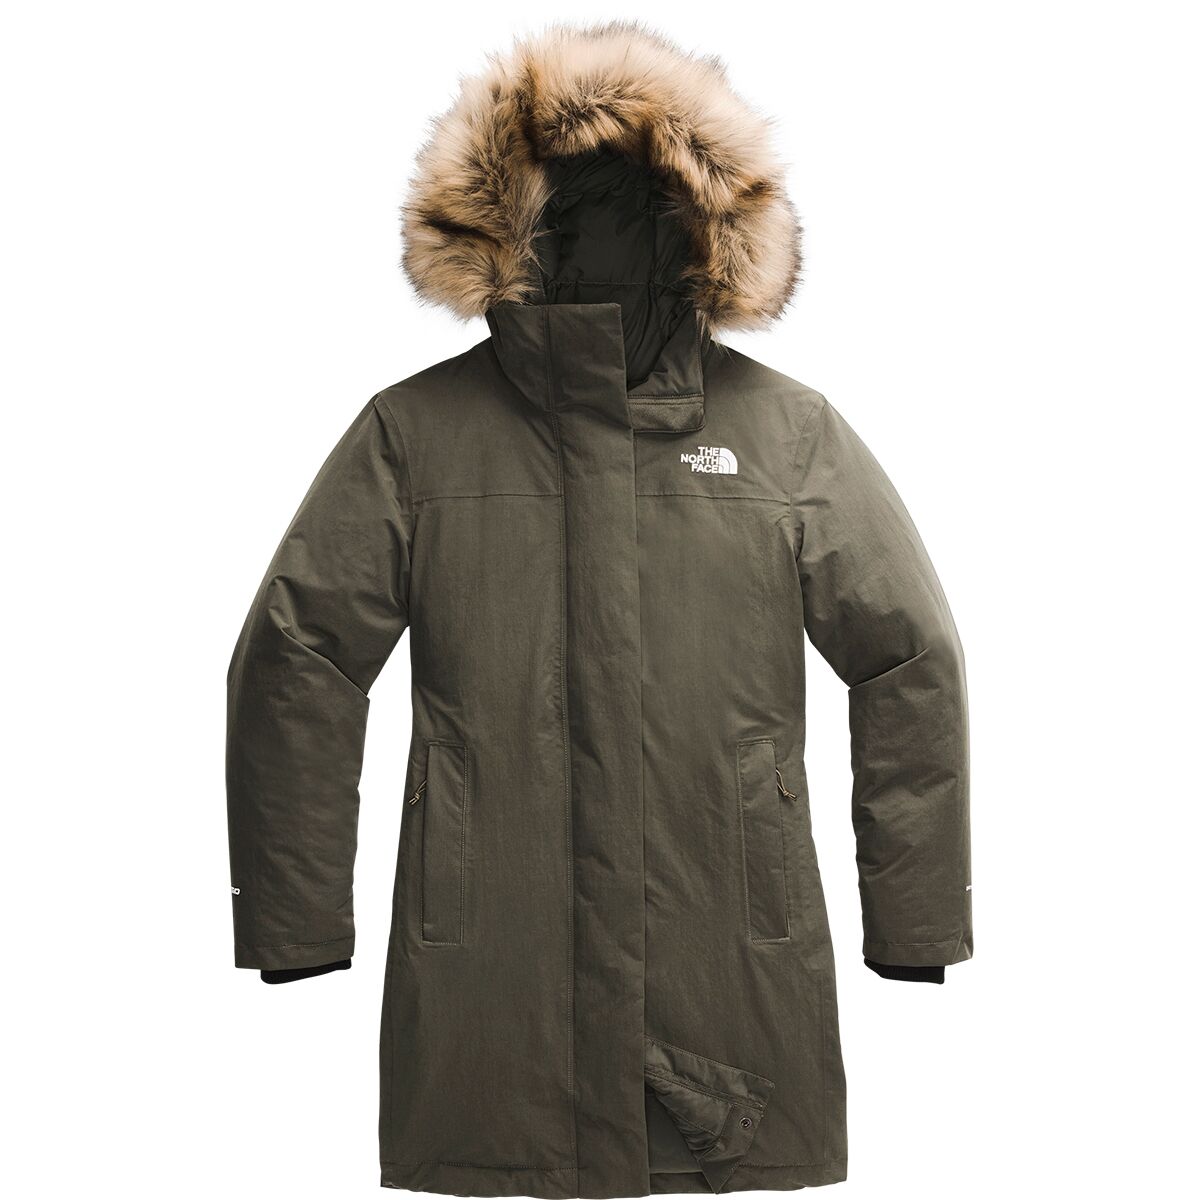 The North Face Arctic - Women's Clothing